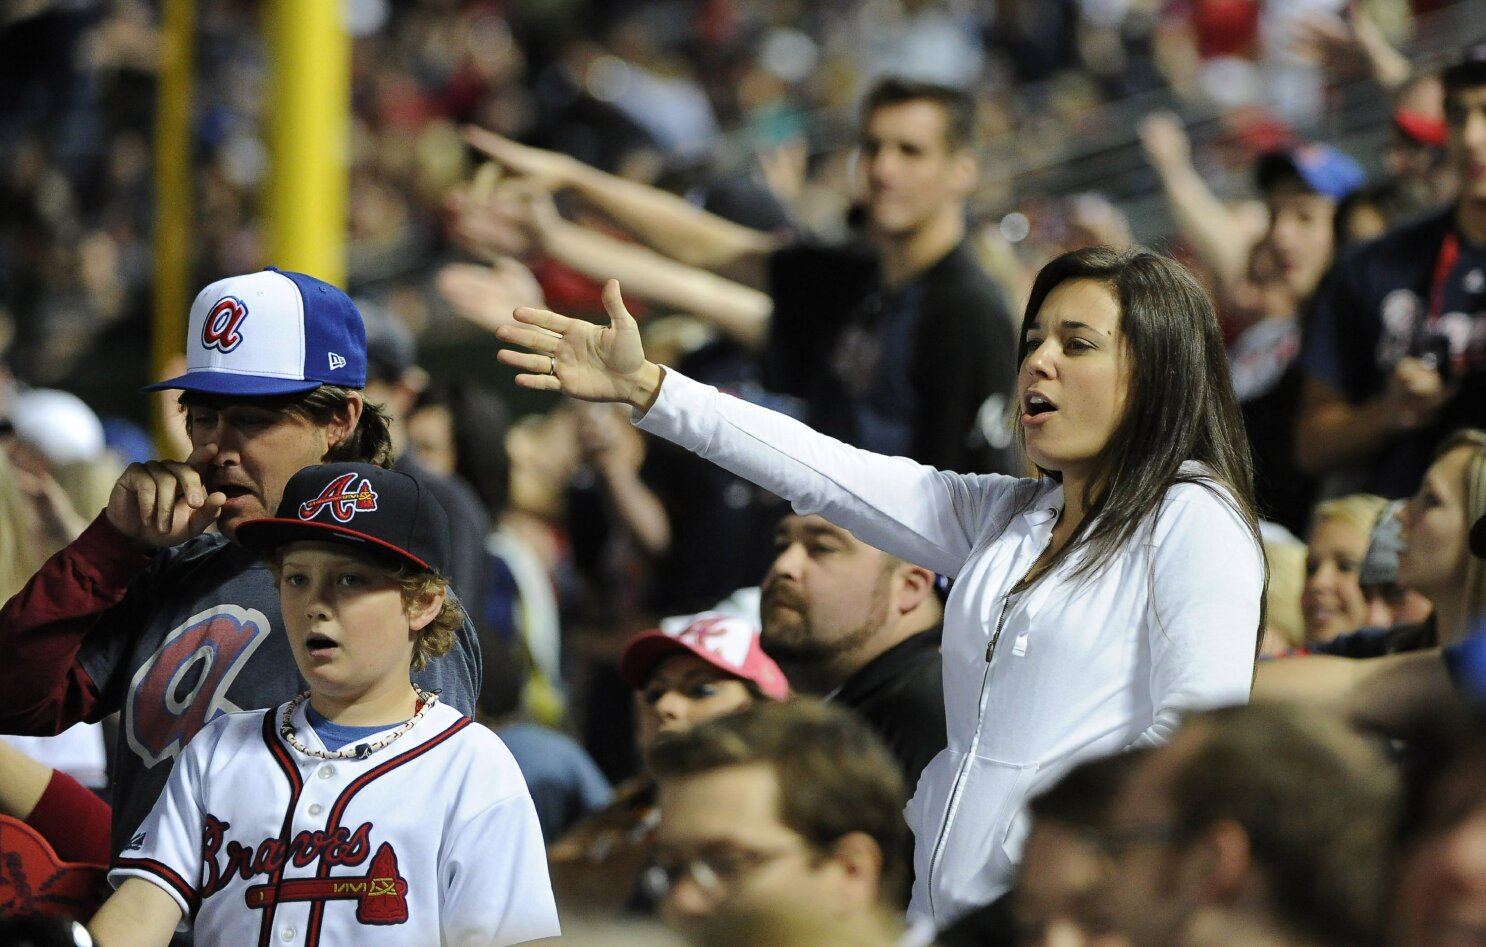 Braves fans perform 'Tomahawk Chop' chant in defiance of Native